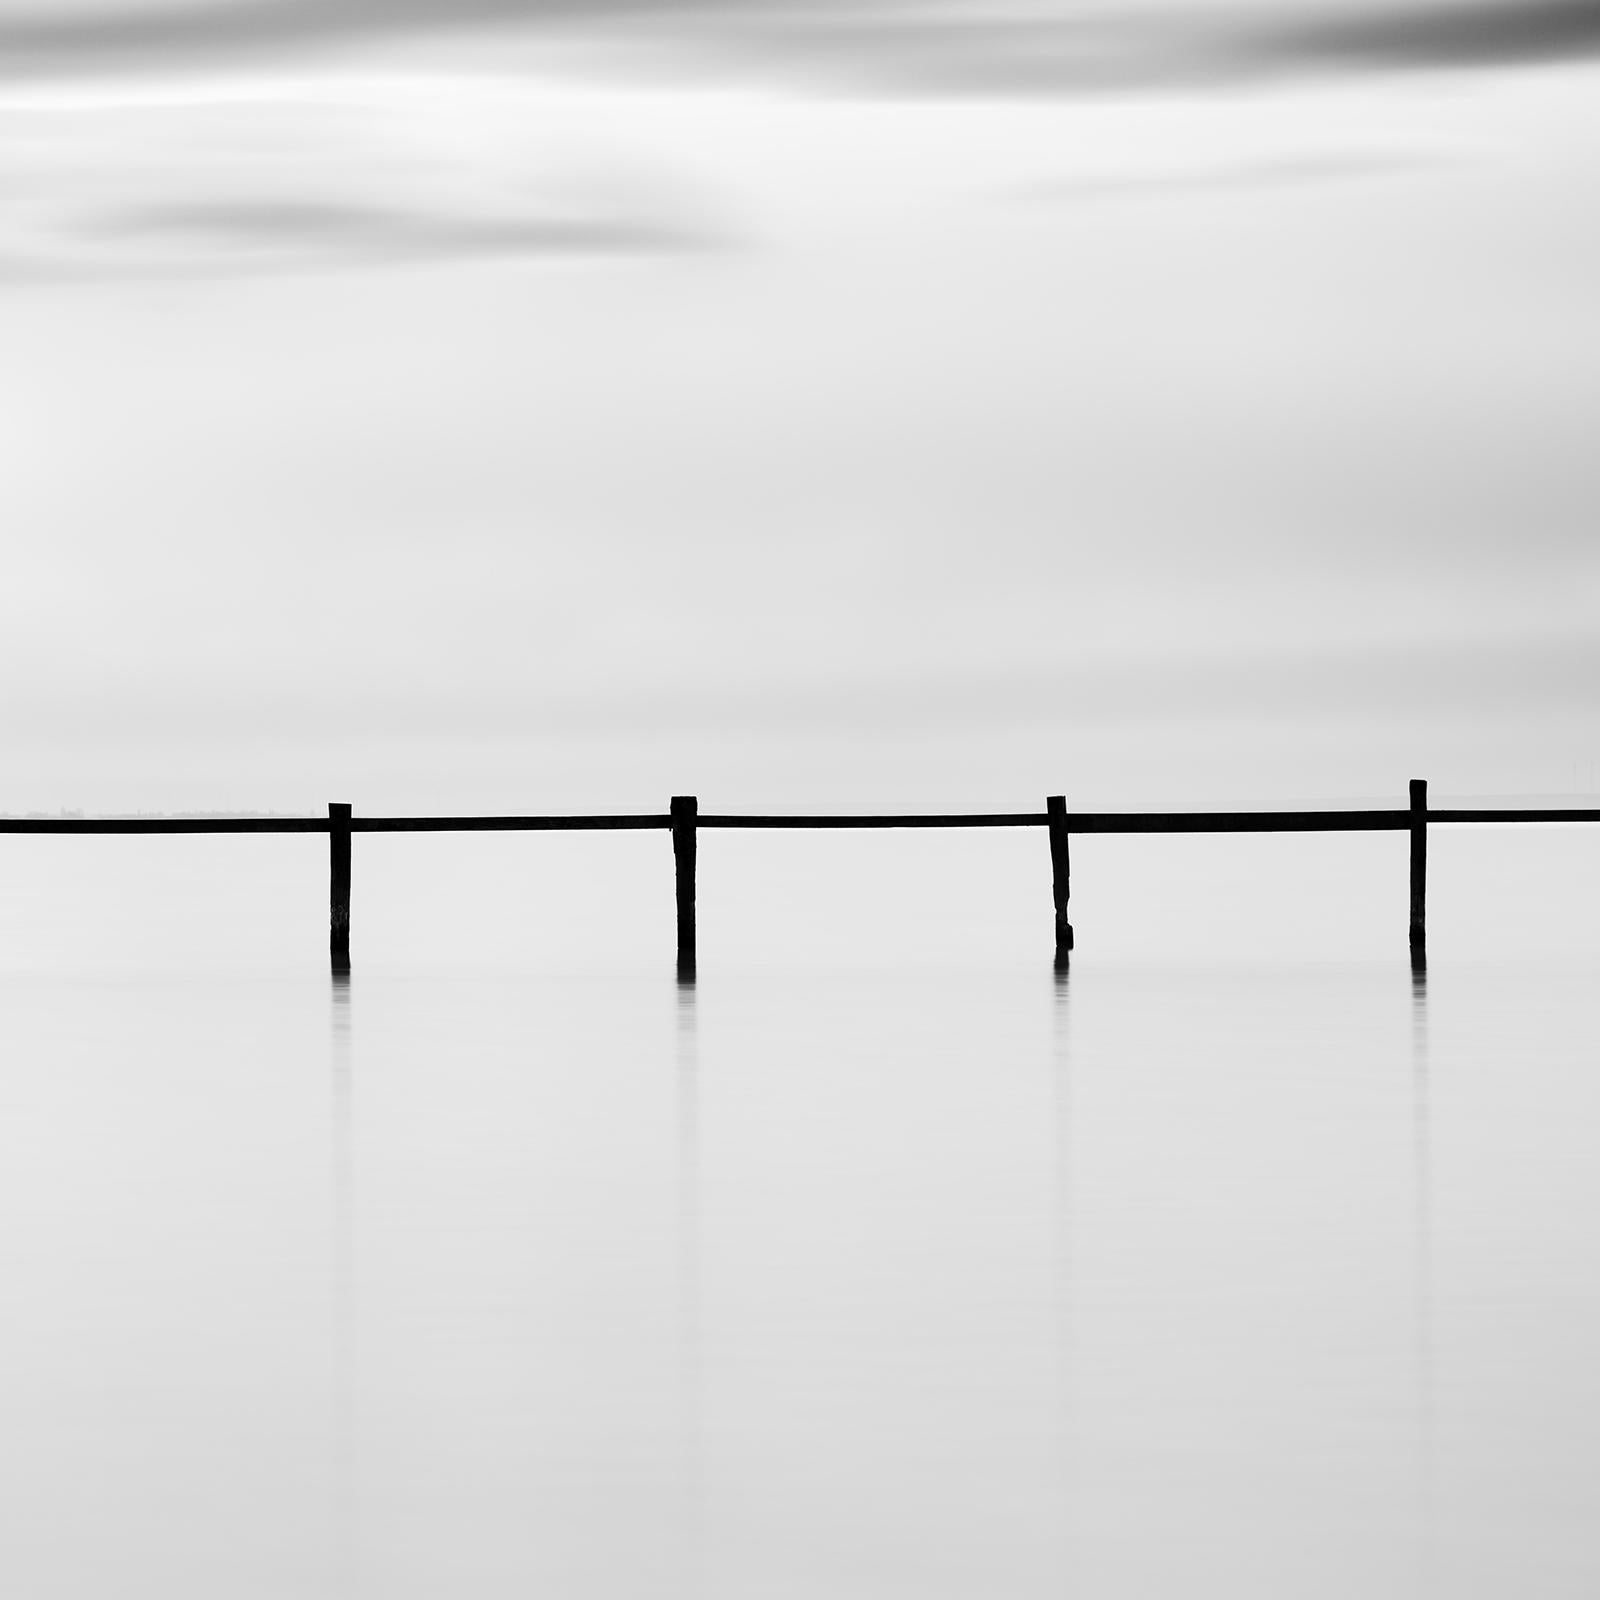 Swimming Area, cloudy, lake, black and white long exposure landscape photography For Sale 5